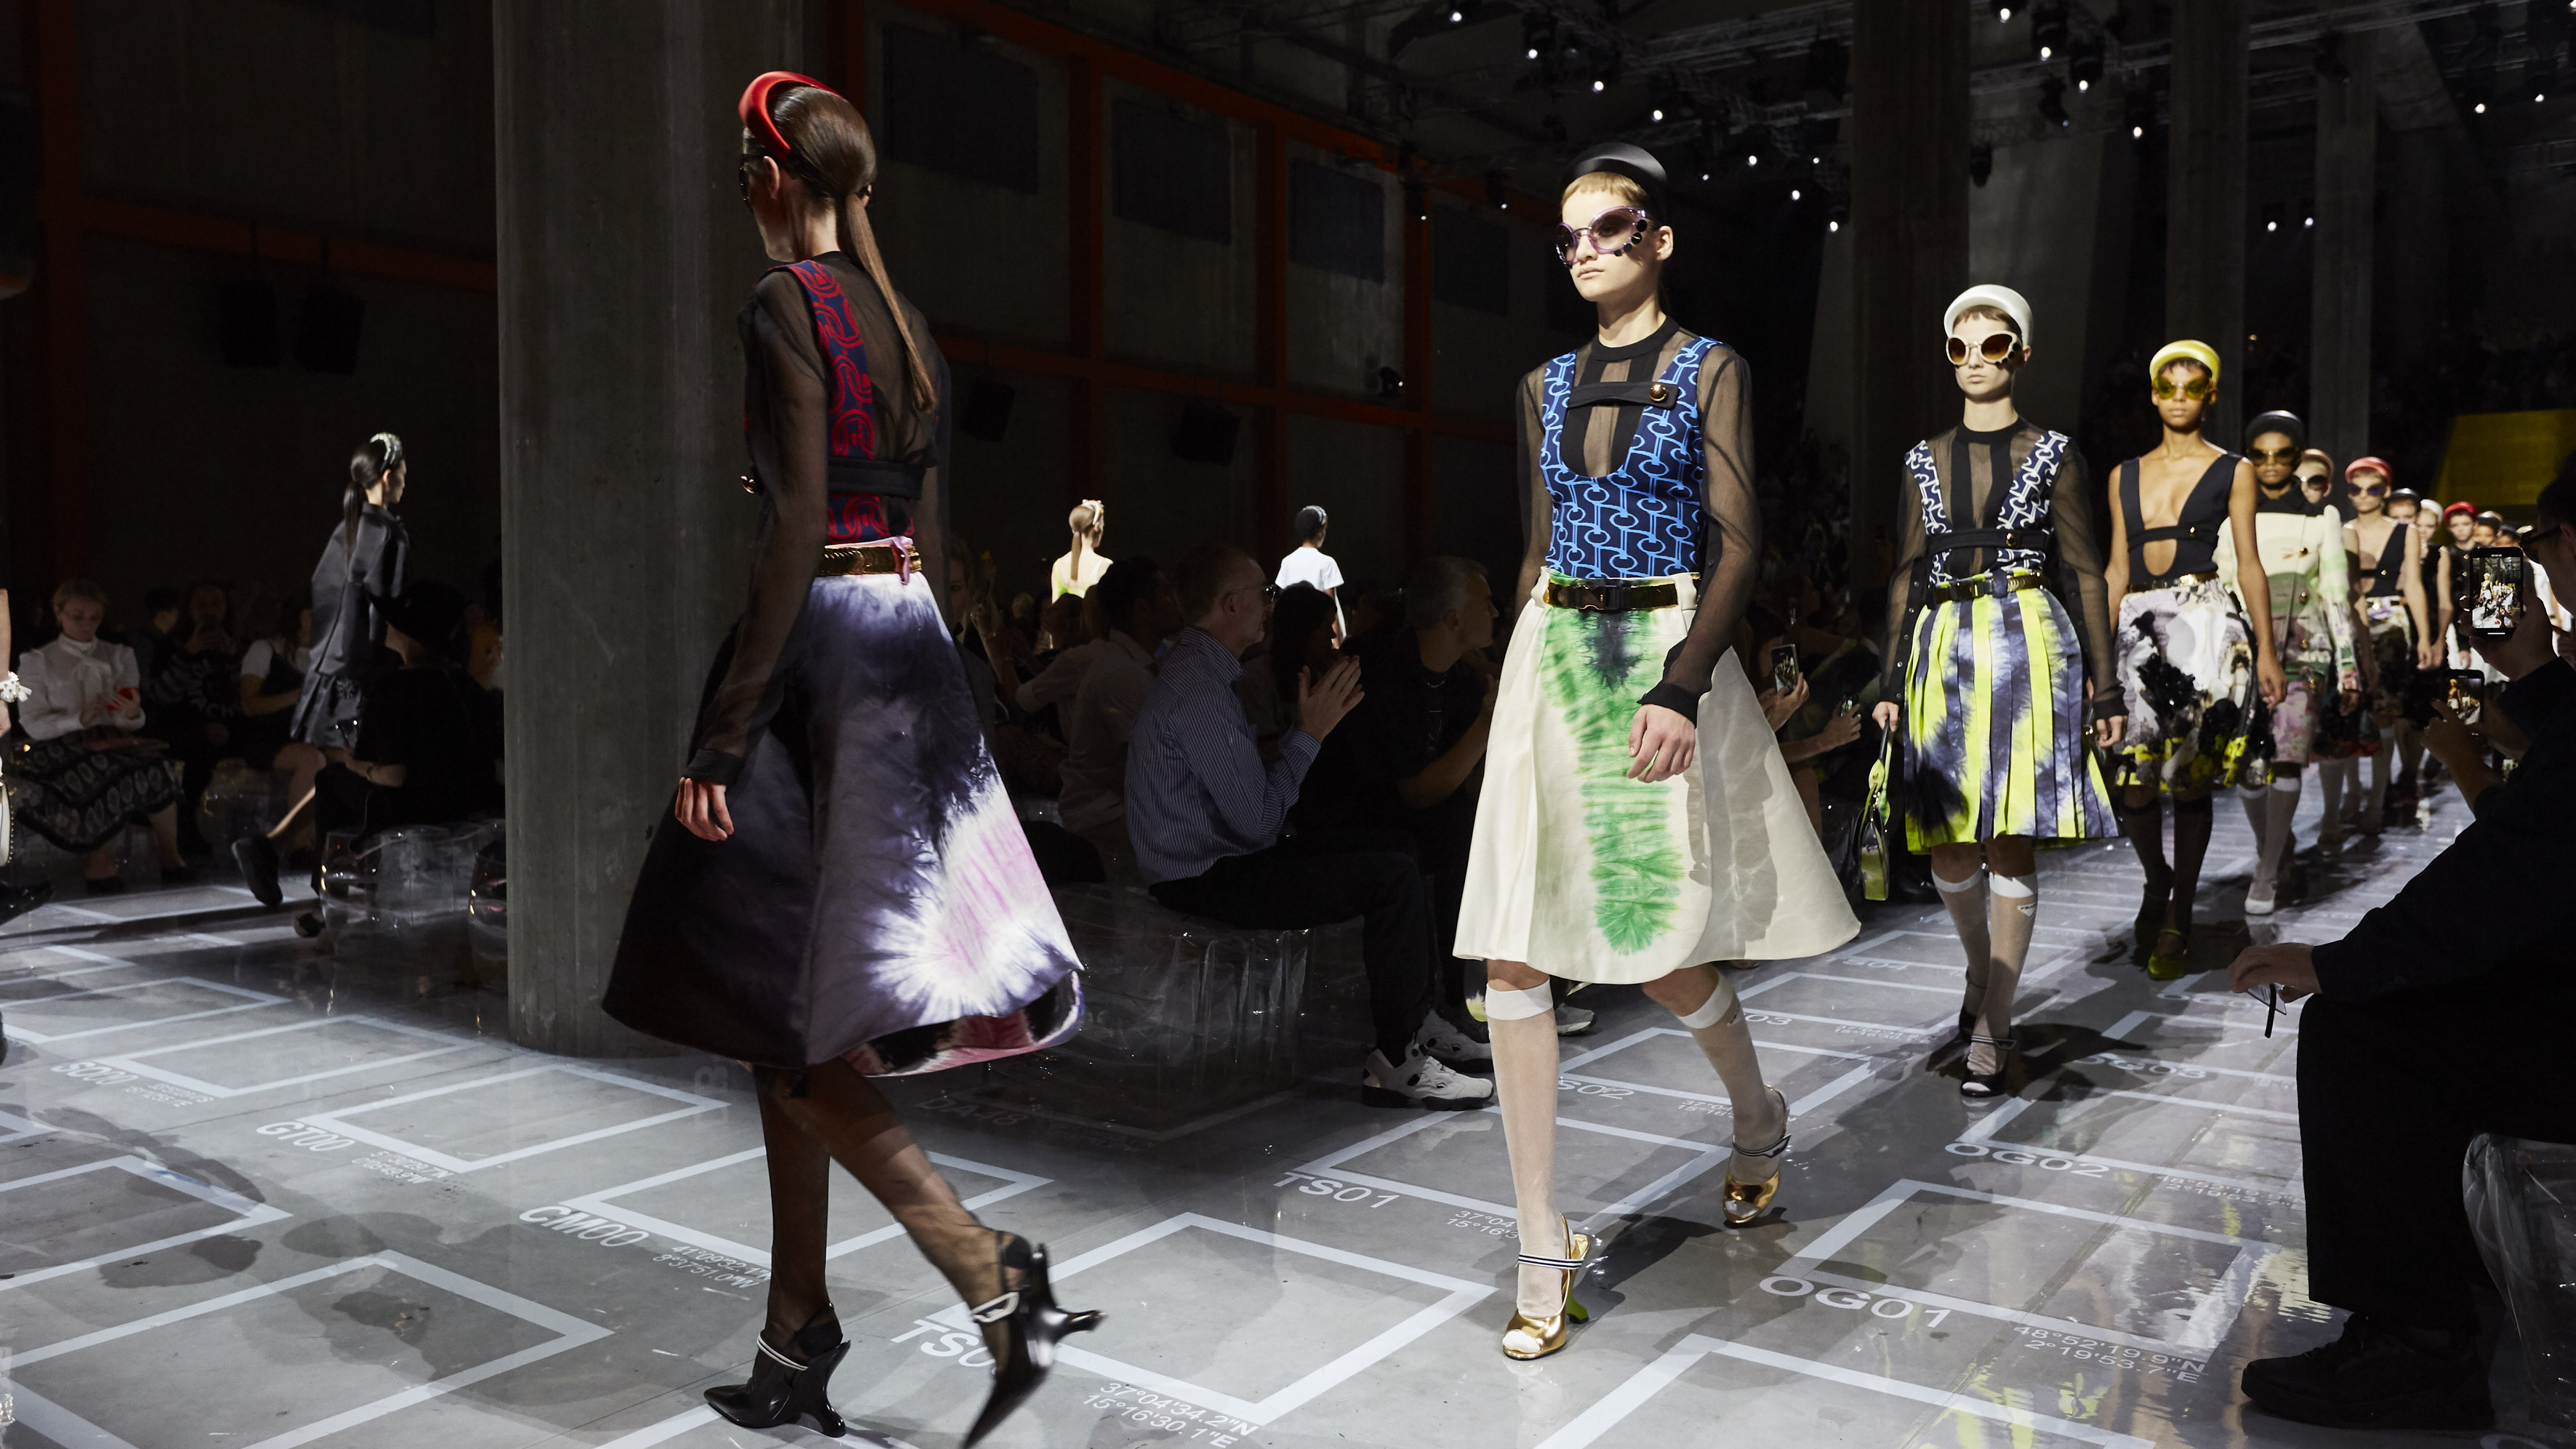 MIUCCA PRADA WANTED TO BREAK THE RULES OF THE CLASSIC